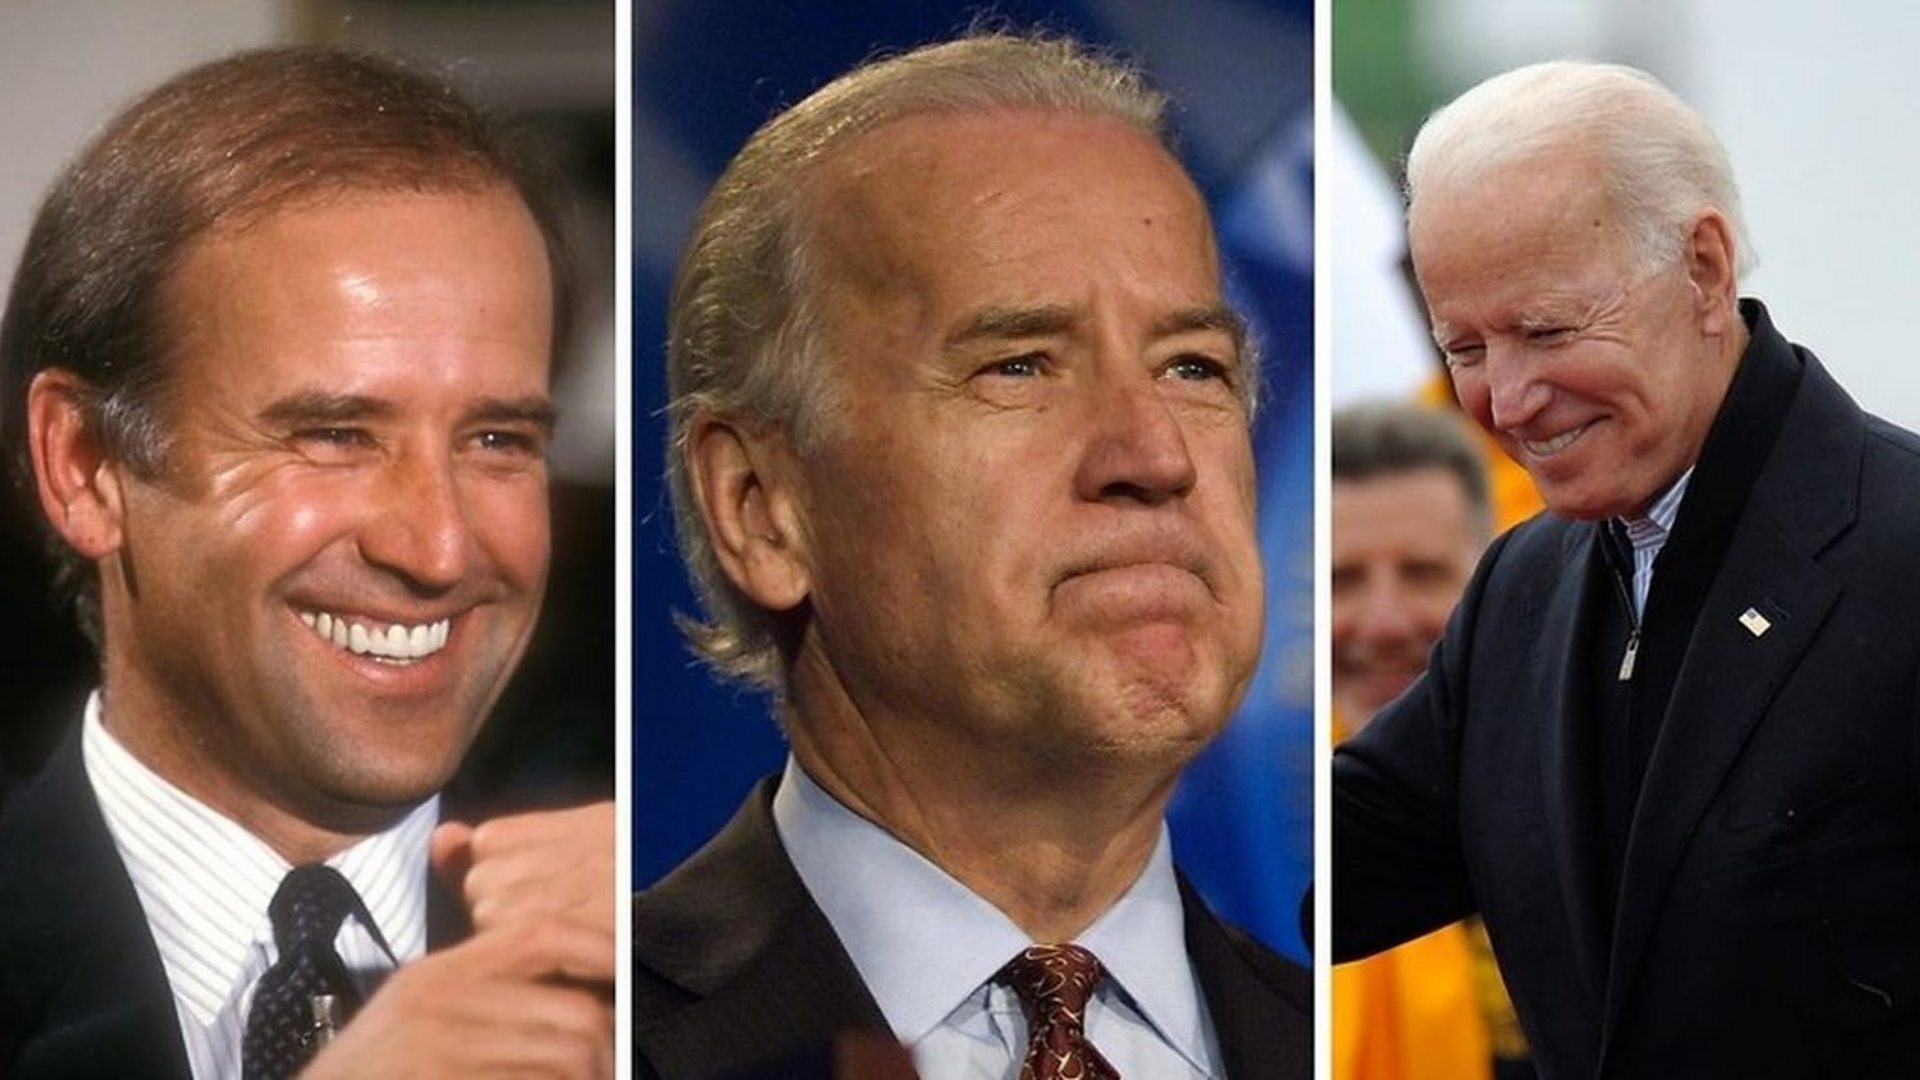 buzzfeed joe biden who is hotter - Biden|President|Joe|Years|Trump|Delaware|Vice|Time|Obama|Senate|States|Law|Age|Campaign|Election|Administration|Family|House|Senator|Office|School|Wife|People|Hunter|University|Act|State|Year|Life|Party|Committee|Children|Beau|Daughter|War|Jill|Day|Facts|Americans|Presidency|Joe Biden|United States|Vice President|White House|Law School|President Trump|Foreign Relations Committee|Donald Trump|President Biden|Presidential Campaign|Presidential Election|Democratic Party|Syracuse University|United Nations|Net Worth|Barack Obama|Judiciary Committee|Neilia Hunter|U.S. Senate|Hillary Clinton|New York Times|Obama Administration|Empty Store Shelves|Systemic Racism|Castle County Council|Archmere Academy|U.S. Senator|Vice Presidency|Second Term|Biden Administration